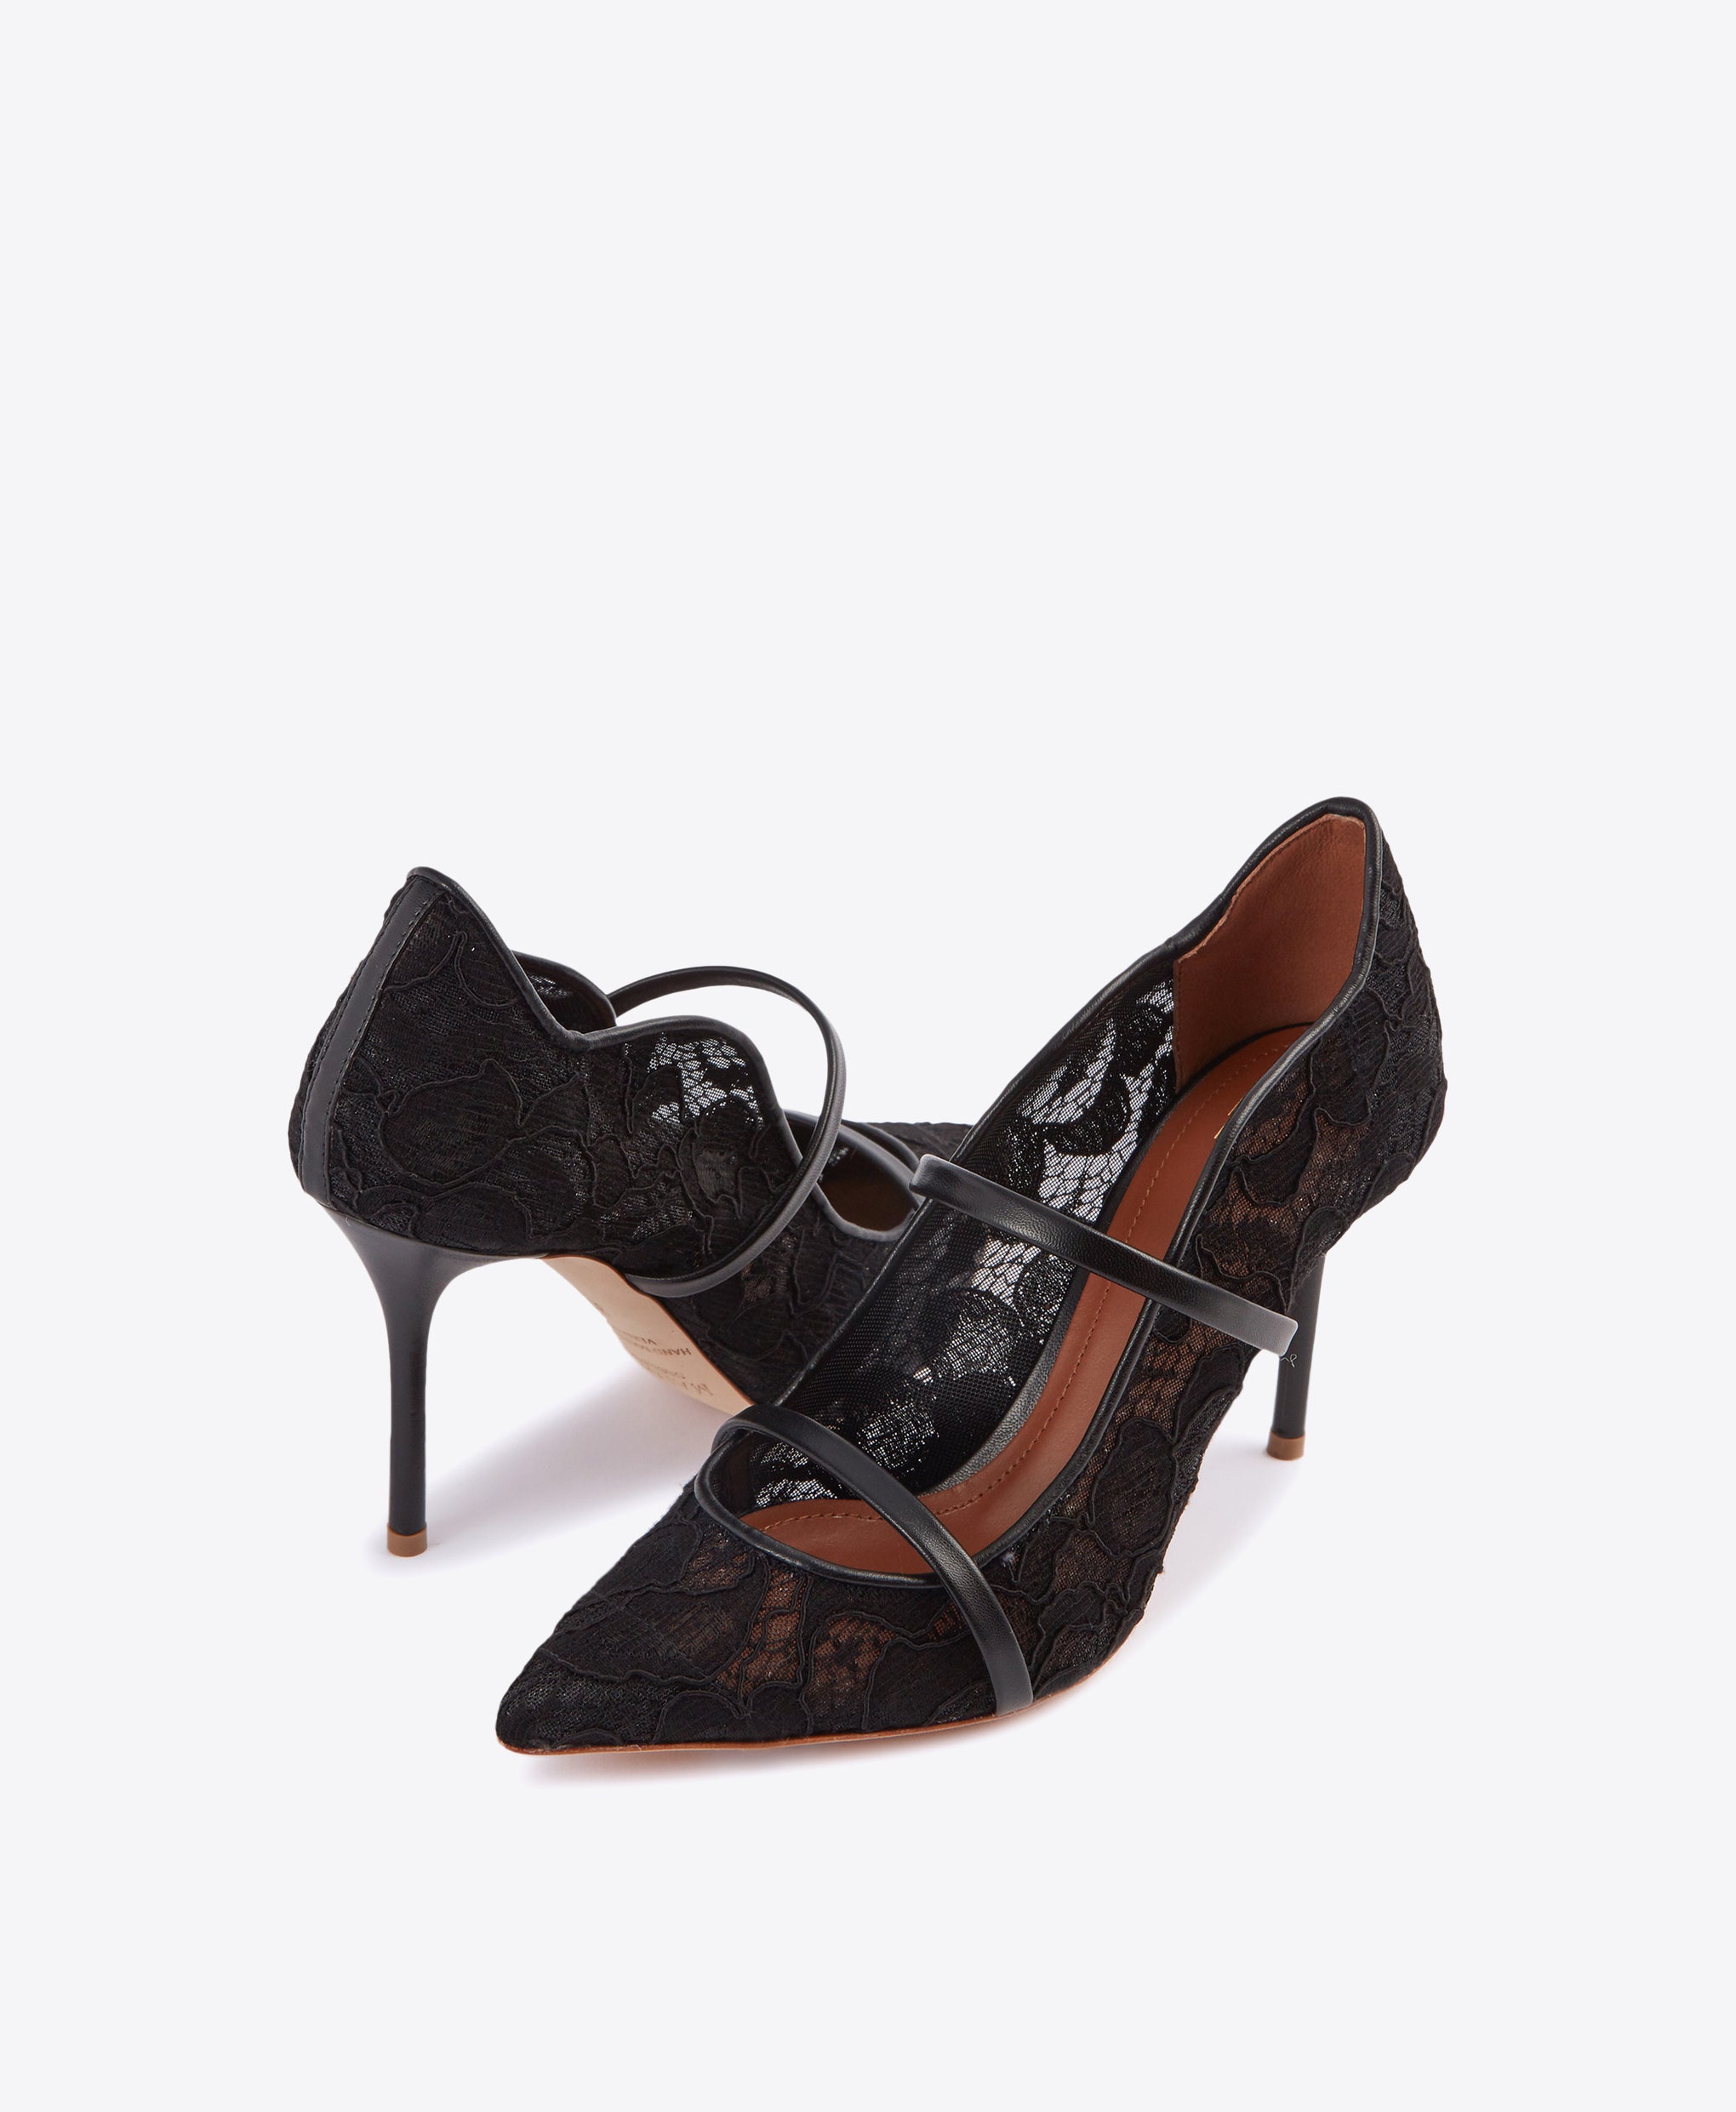 Malone Souliers Black Lace and Leather Maureen 85mm Pointed Toe High Heel Pumps